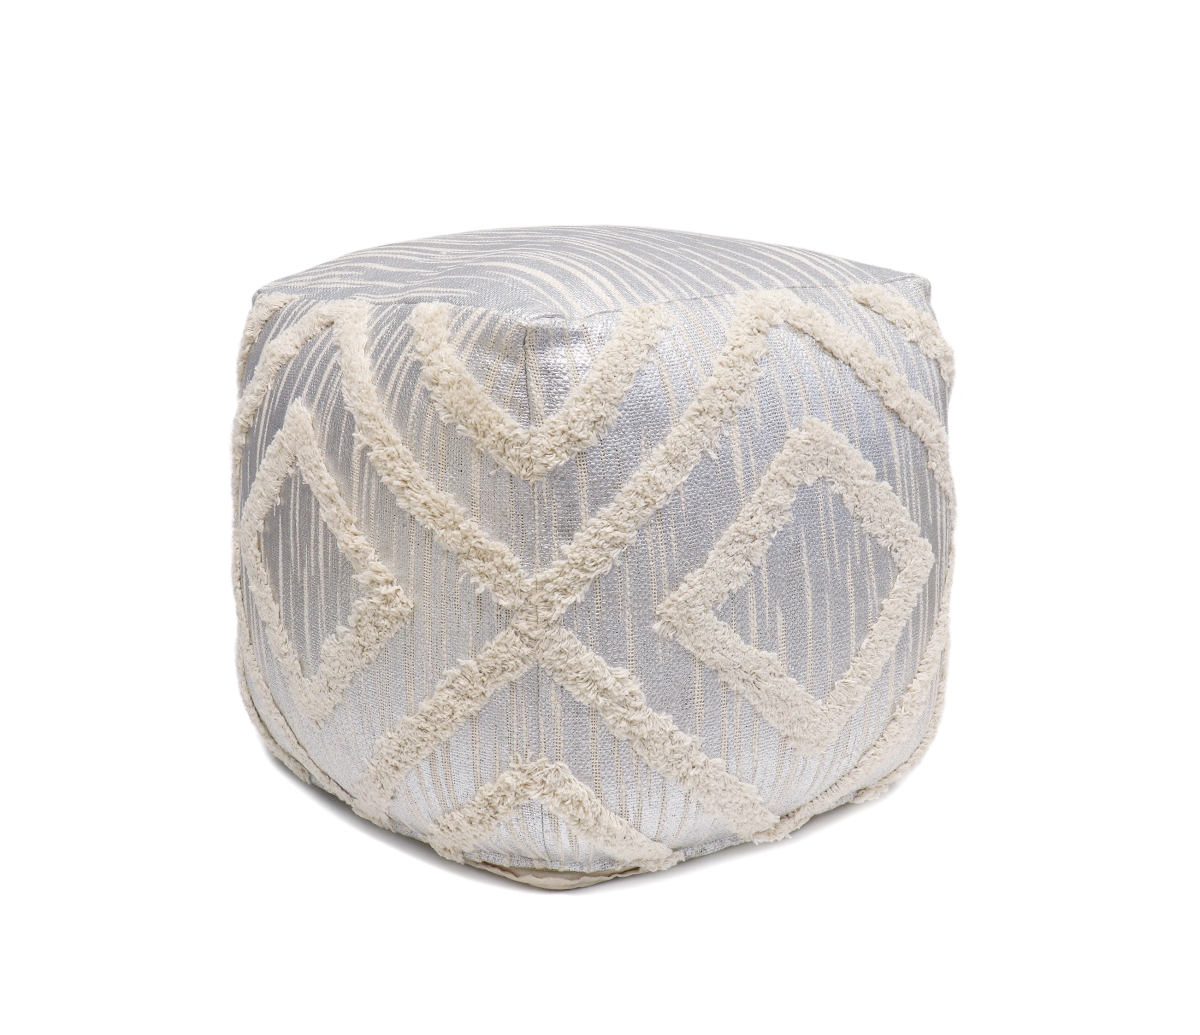 Ppf-064-1sil Grand Canyon Cotton Pouf - Silver Foiled - 17.75 X 17.75 X 17.75 In.